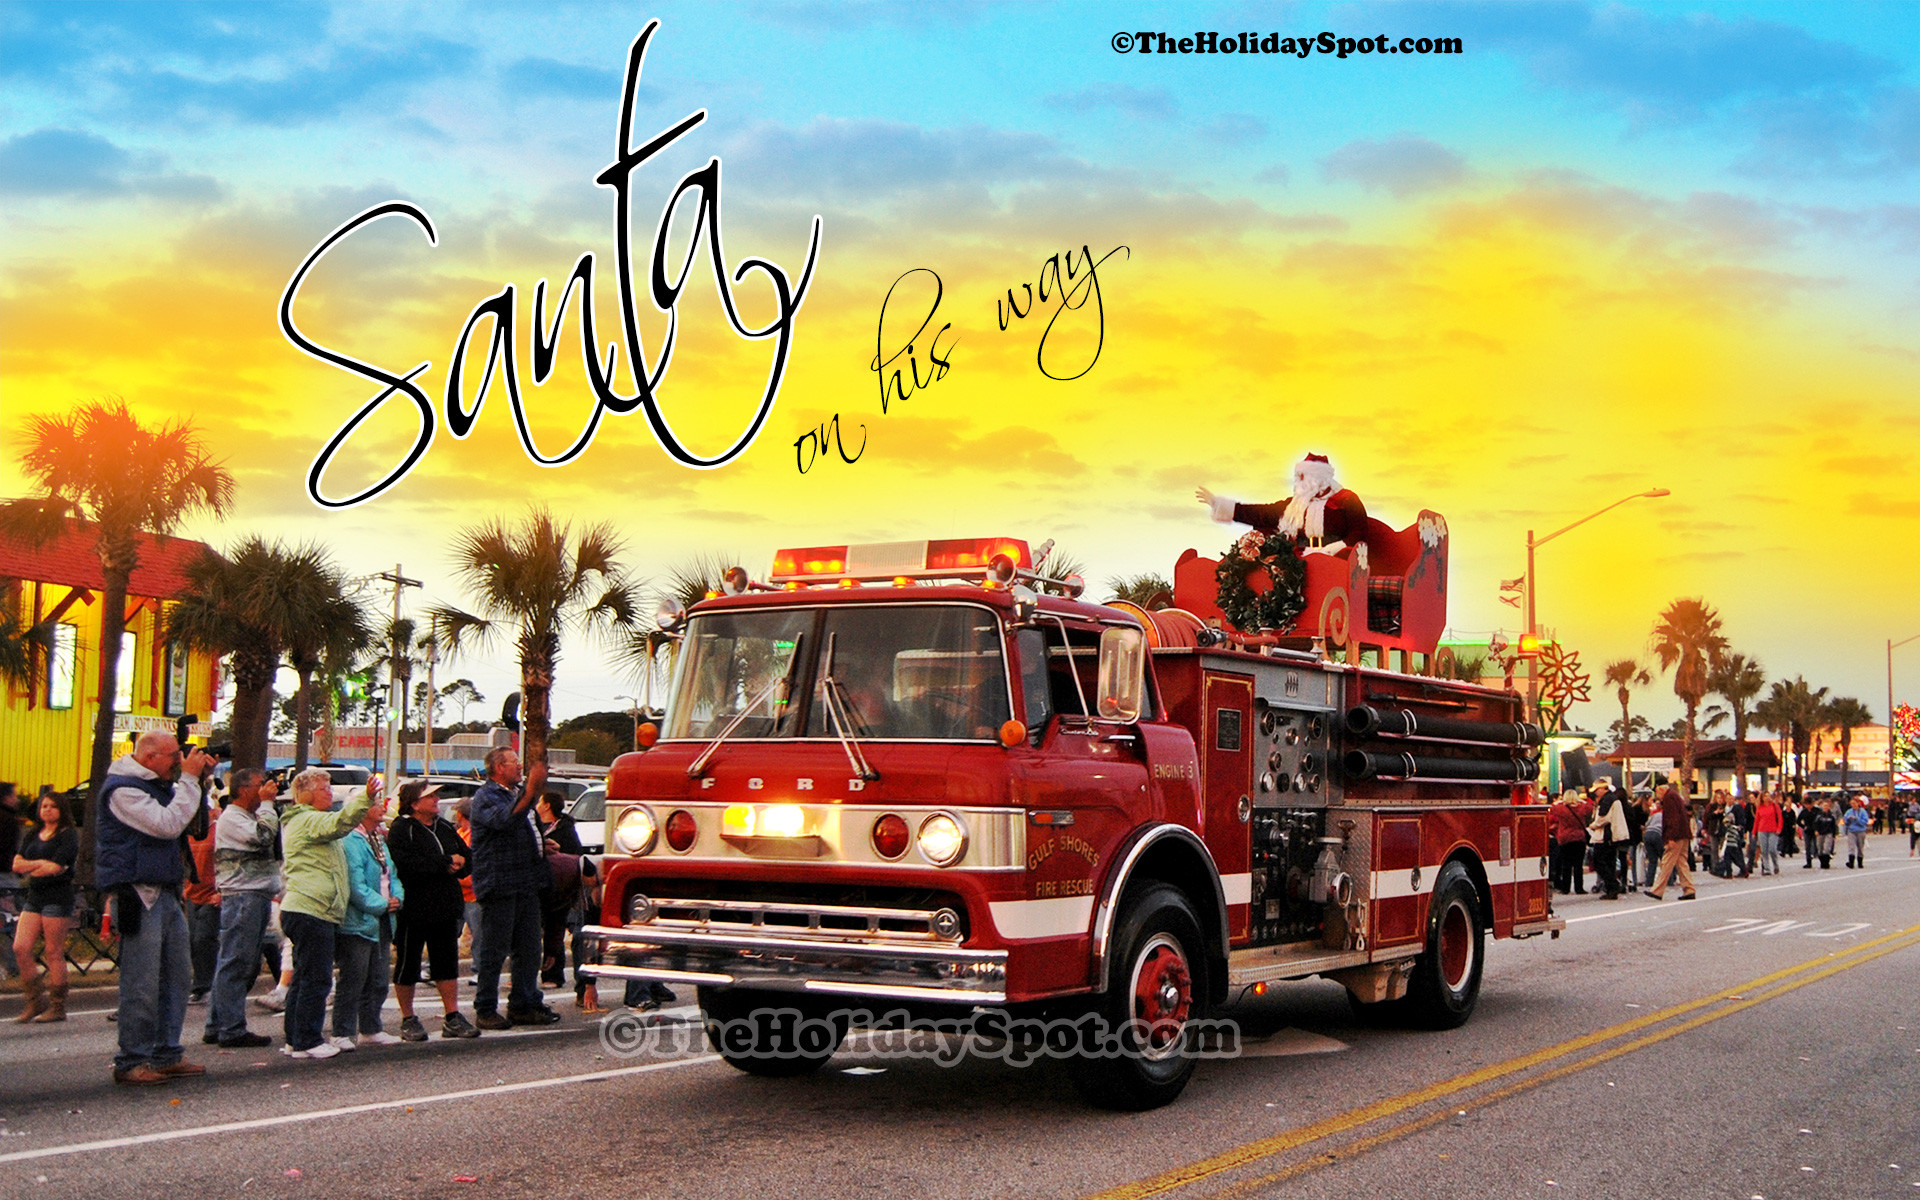 Christmas wallpaper of Santa coming to town on a firefighter truck.